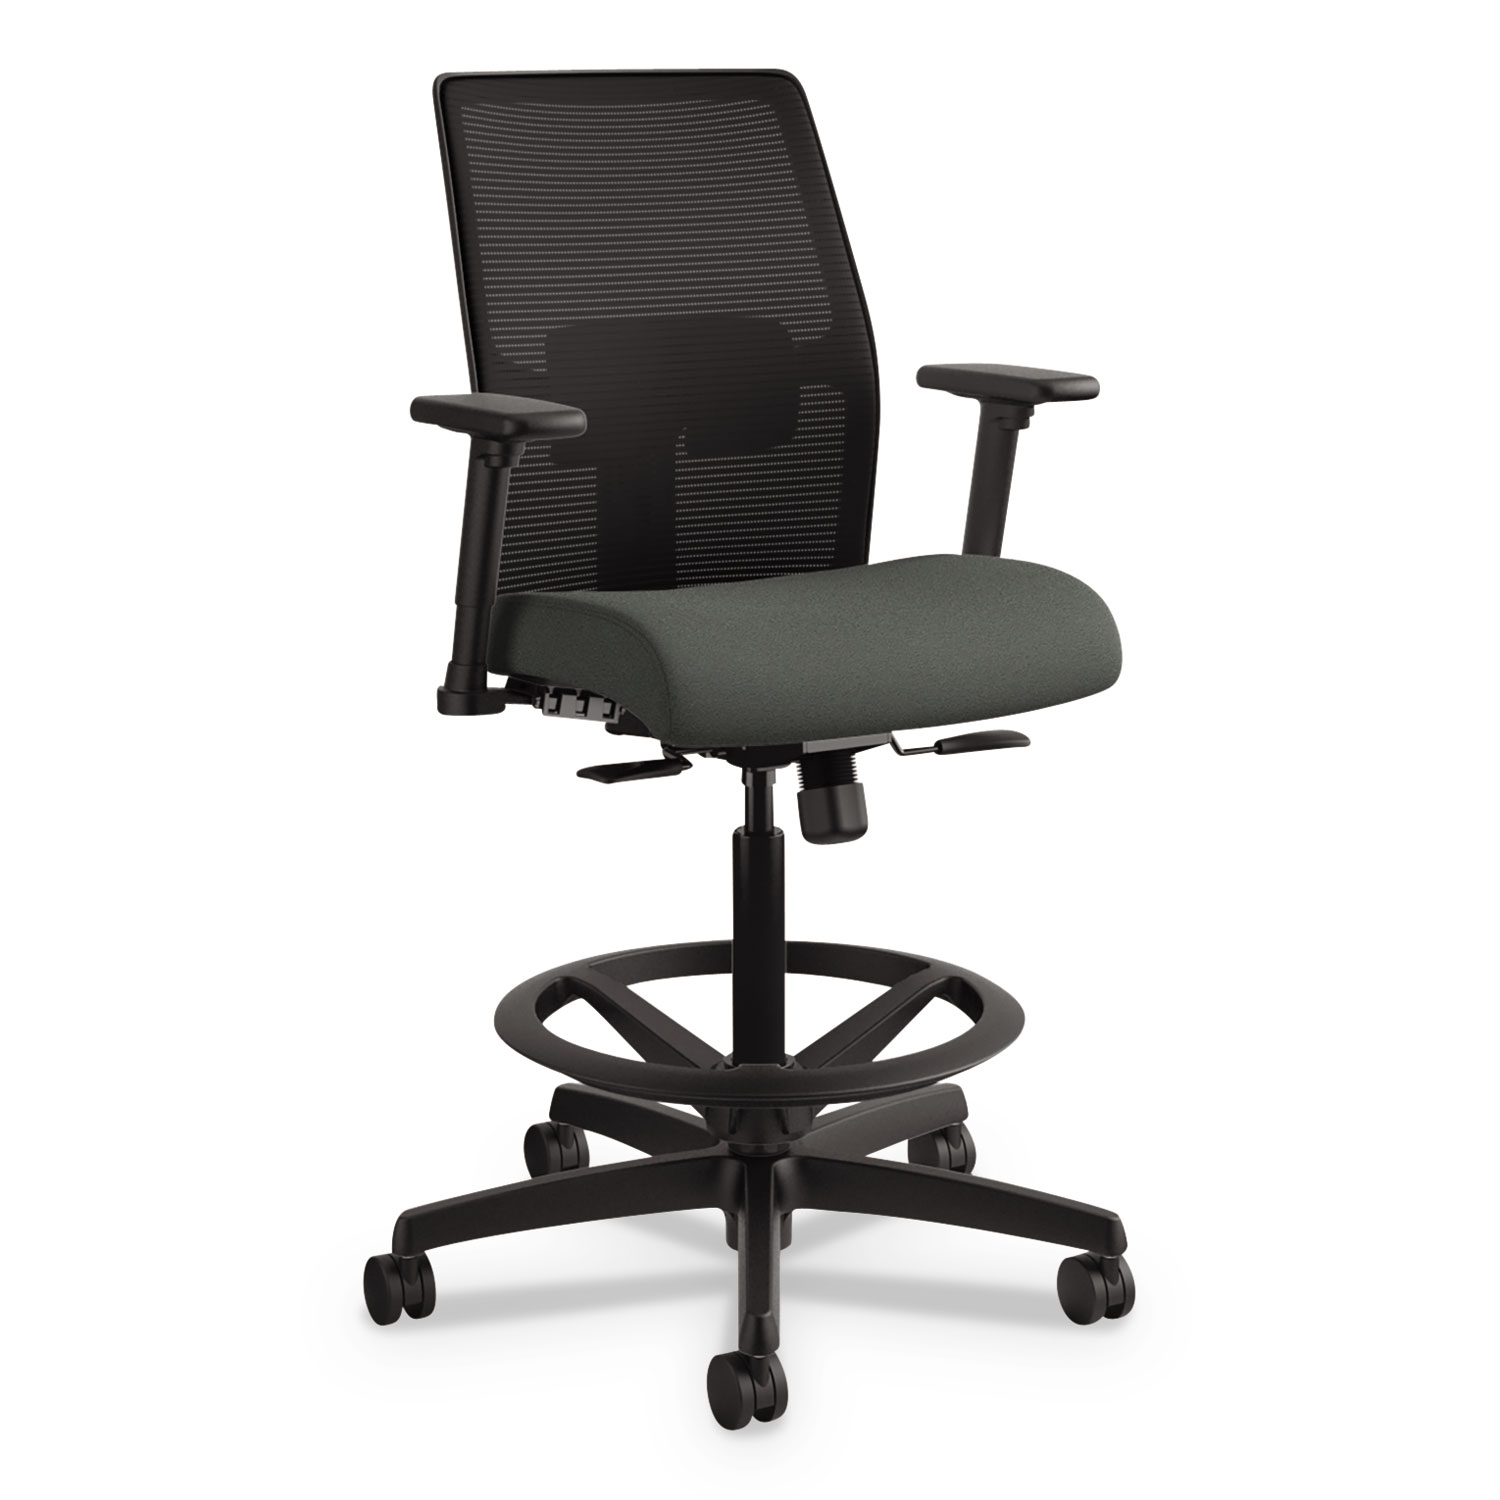  HON I2S1AMLC19T Ignition 2.0 Ilira-Stretch Mesh Back Task Stool, 32 Seat Height, Up to 300 lbs., Iron Ore Seat/Black Back, Black Base (HONI2S1AMLC19T) 